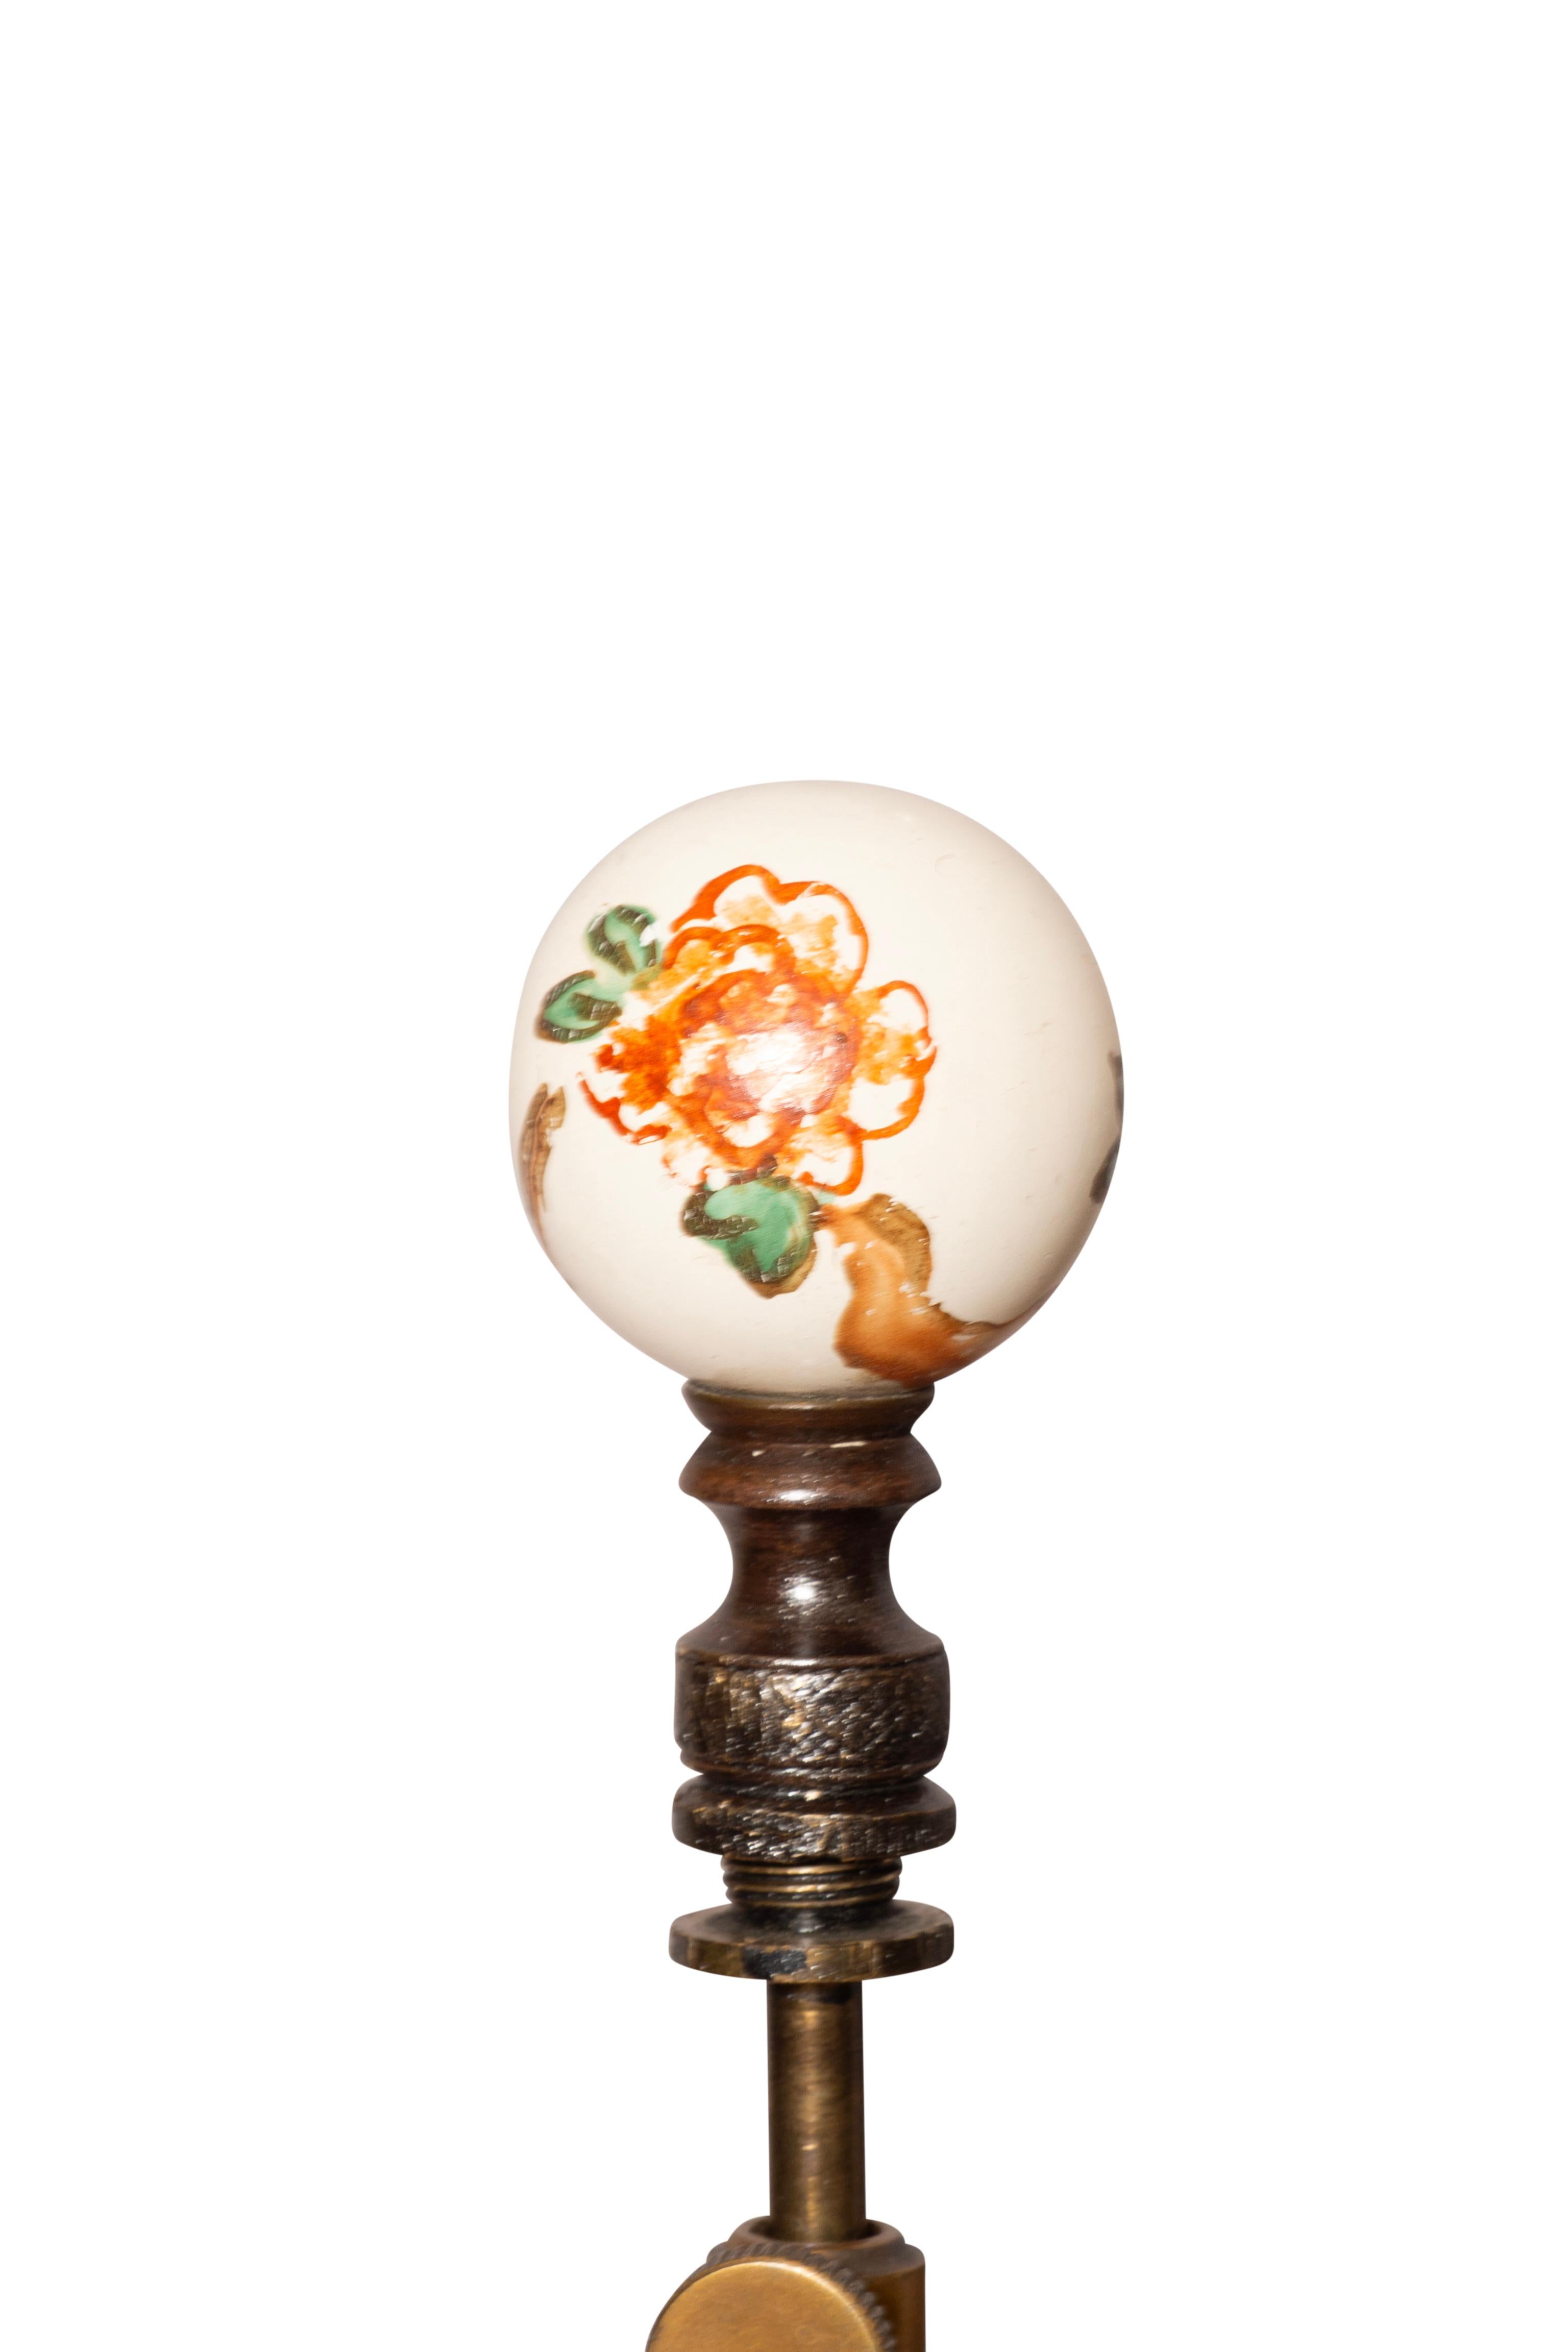 Interesting lamps with a central porcelain ginger jar with prunus decoration with cover with a carved and painted wood base to match and blend with the porcelain. An extender between the cover and the top of the vase. Someone went to lots of trouble